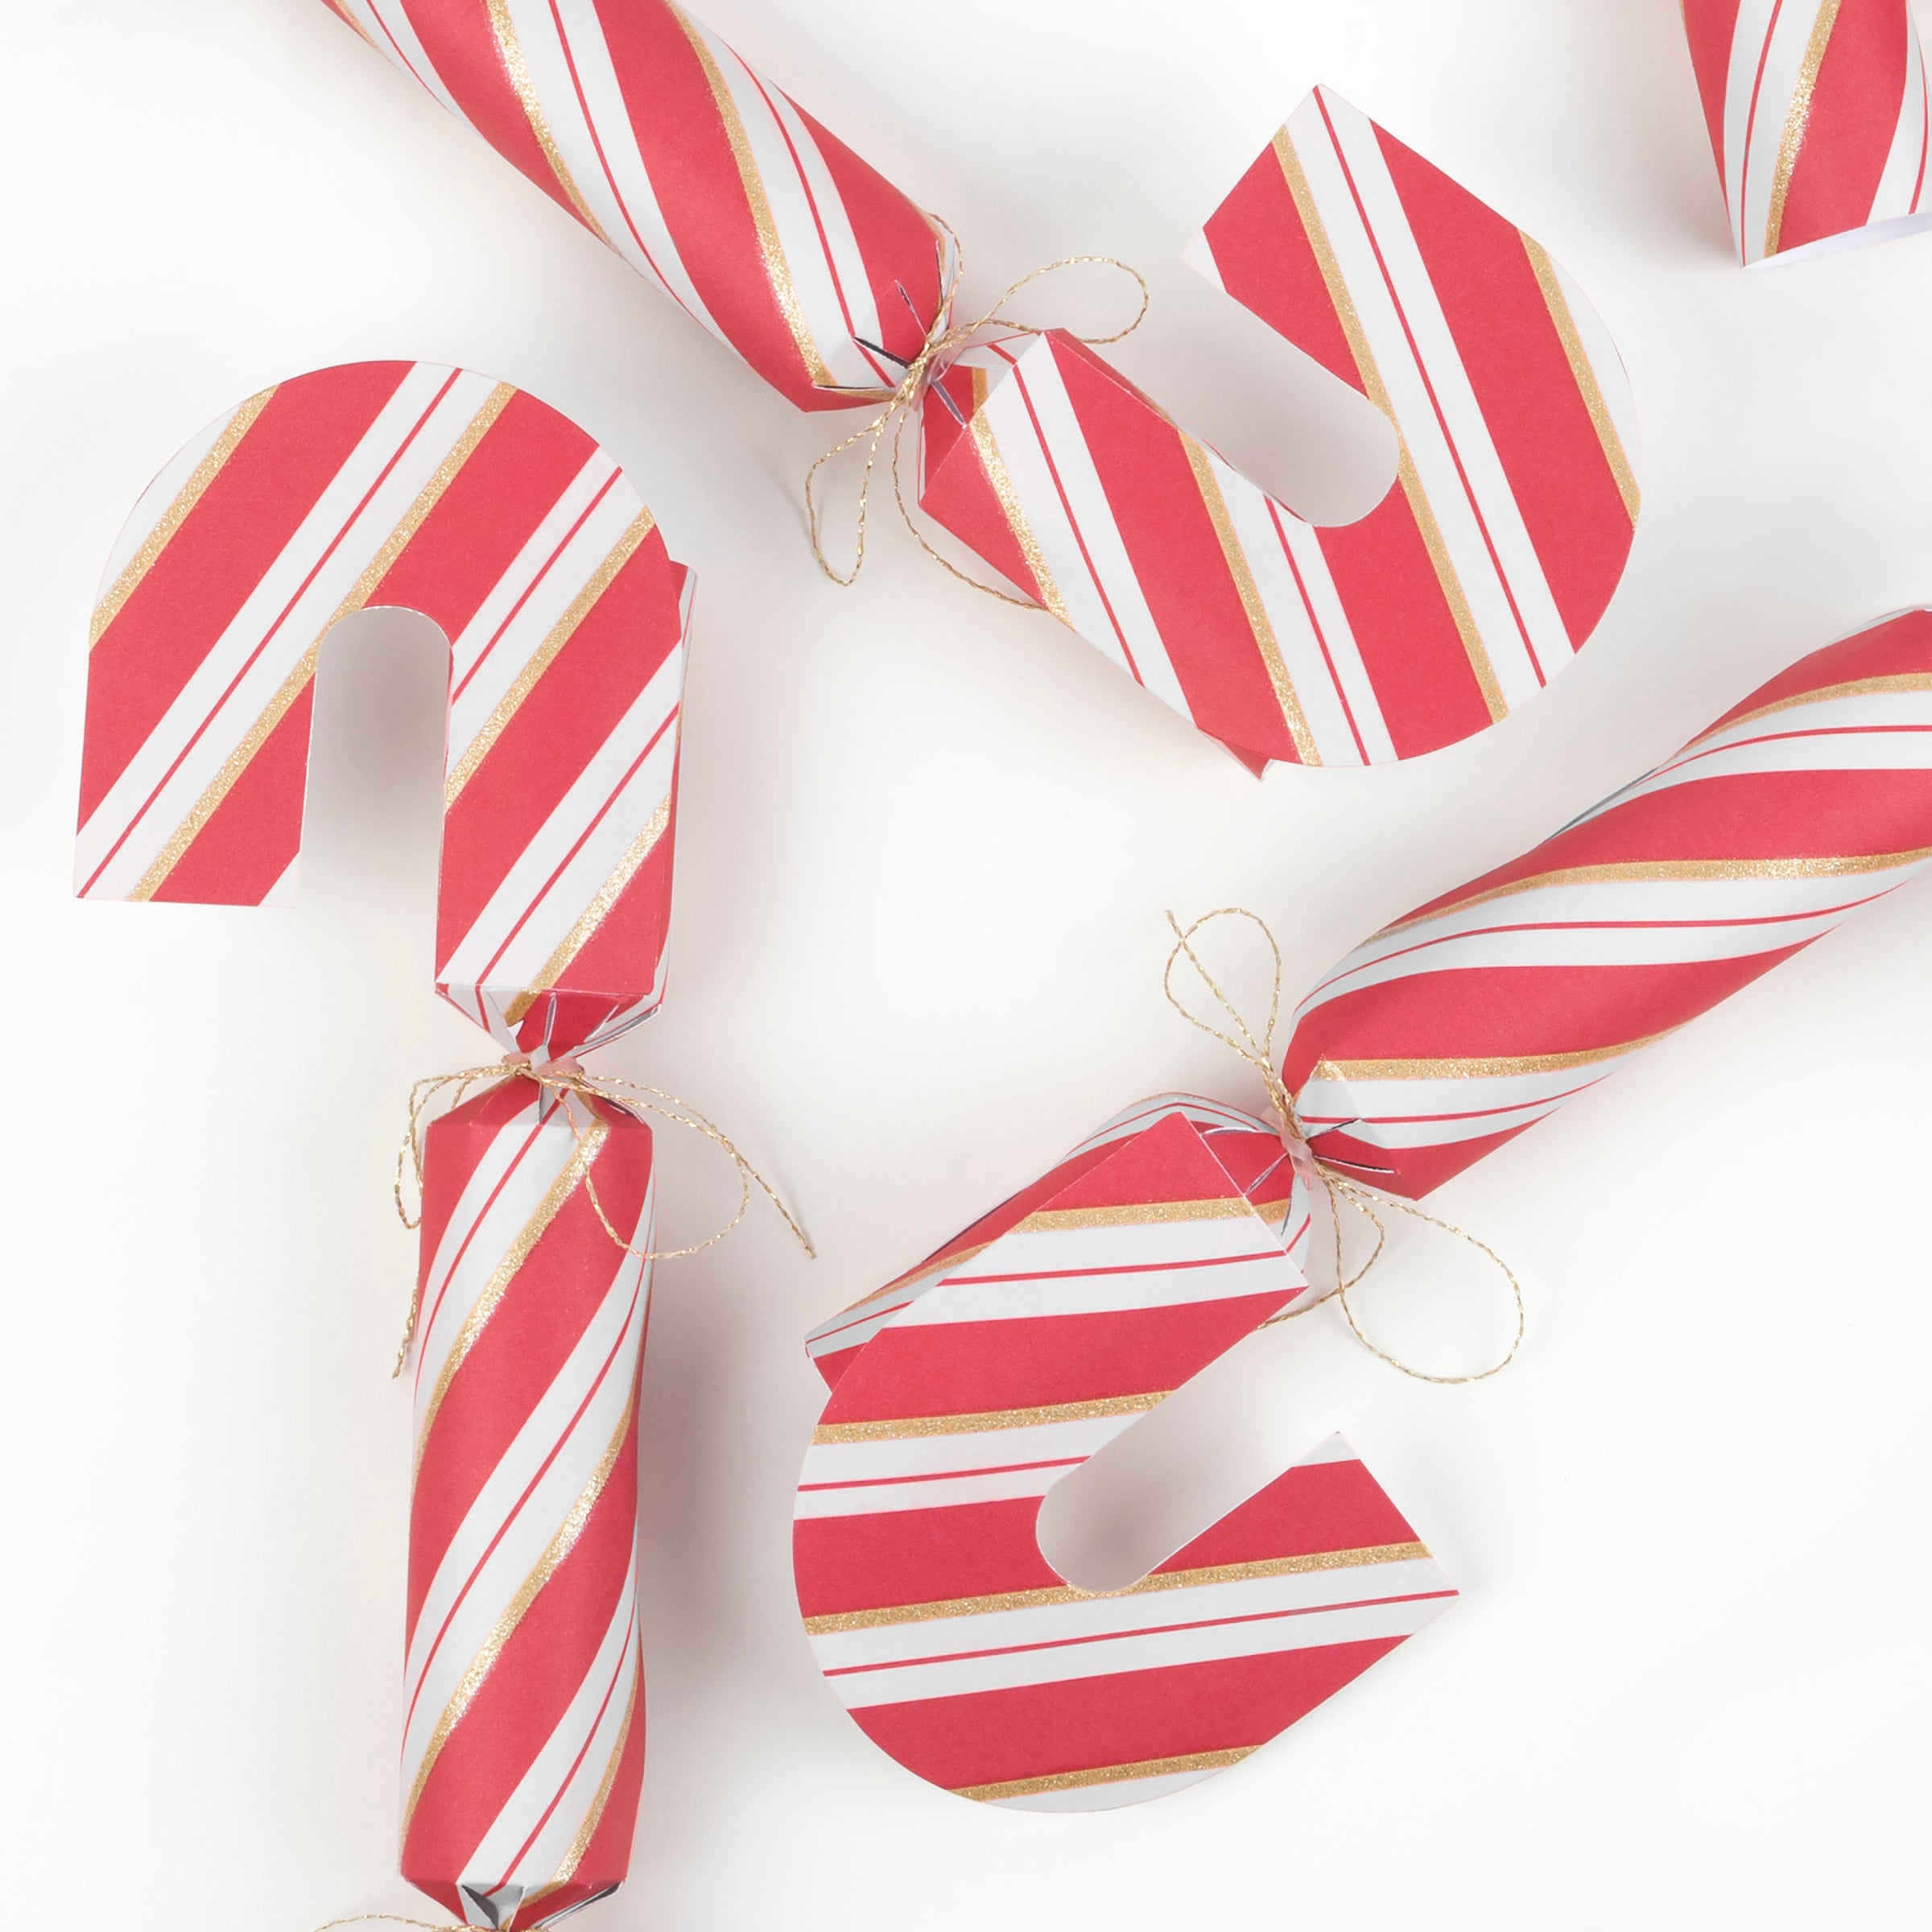 Our fun Christmas crackers, designed as candy cane decorations, make wonderful Christmas crackers for kids.